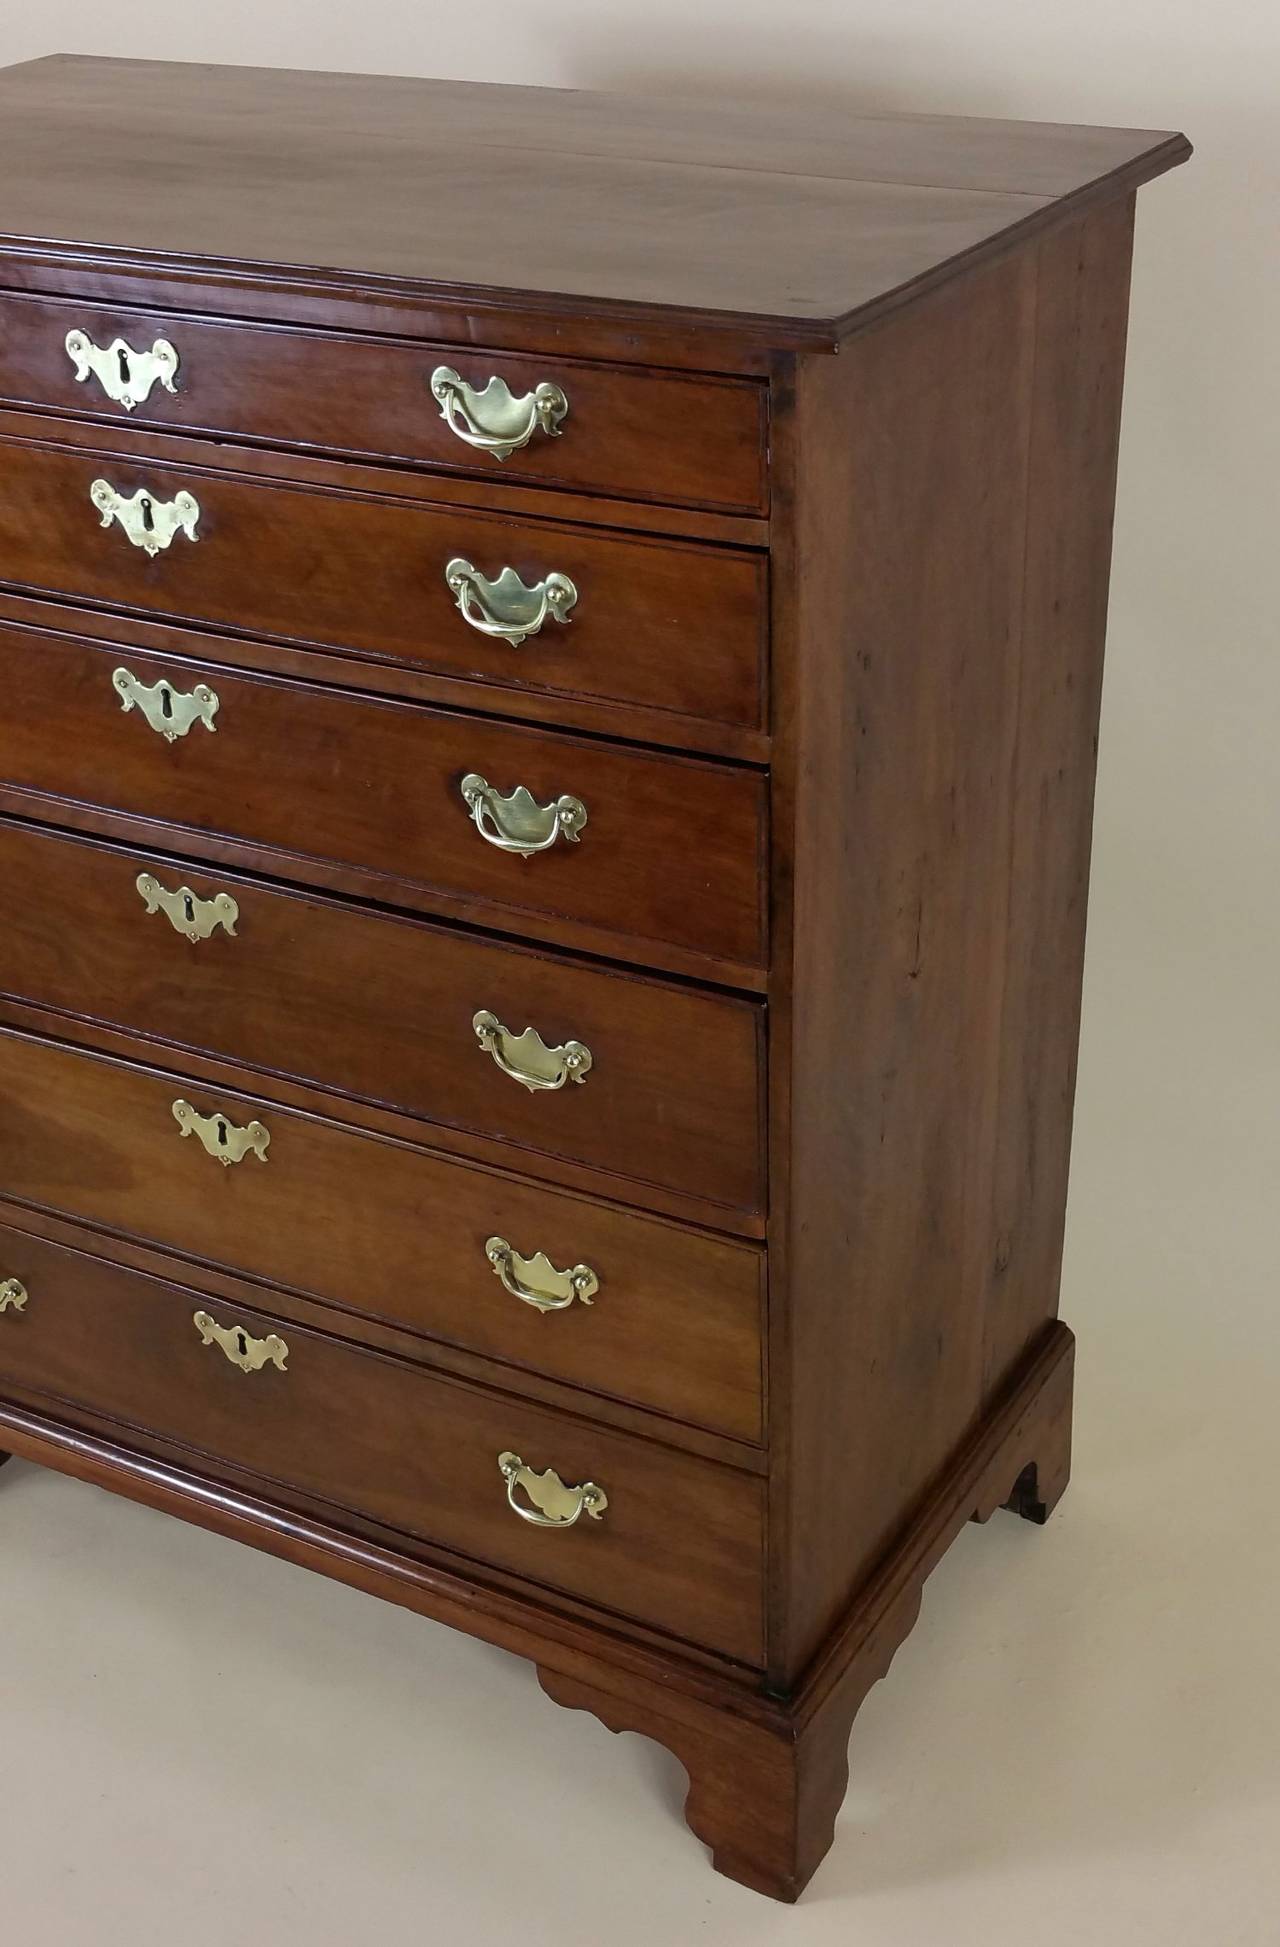 Great Britain (UK) Rare George II Solid Apple Wood Chest of Drawers